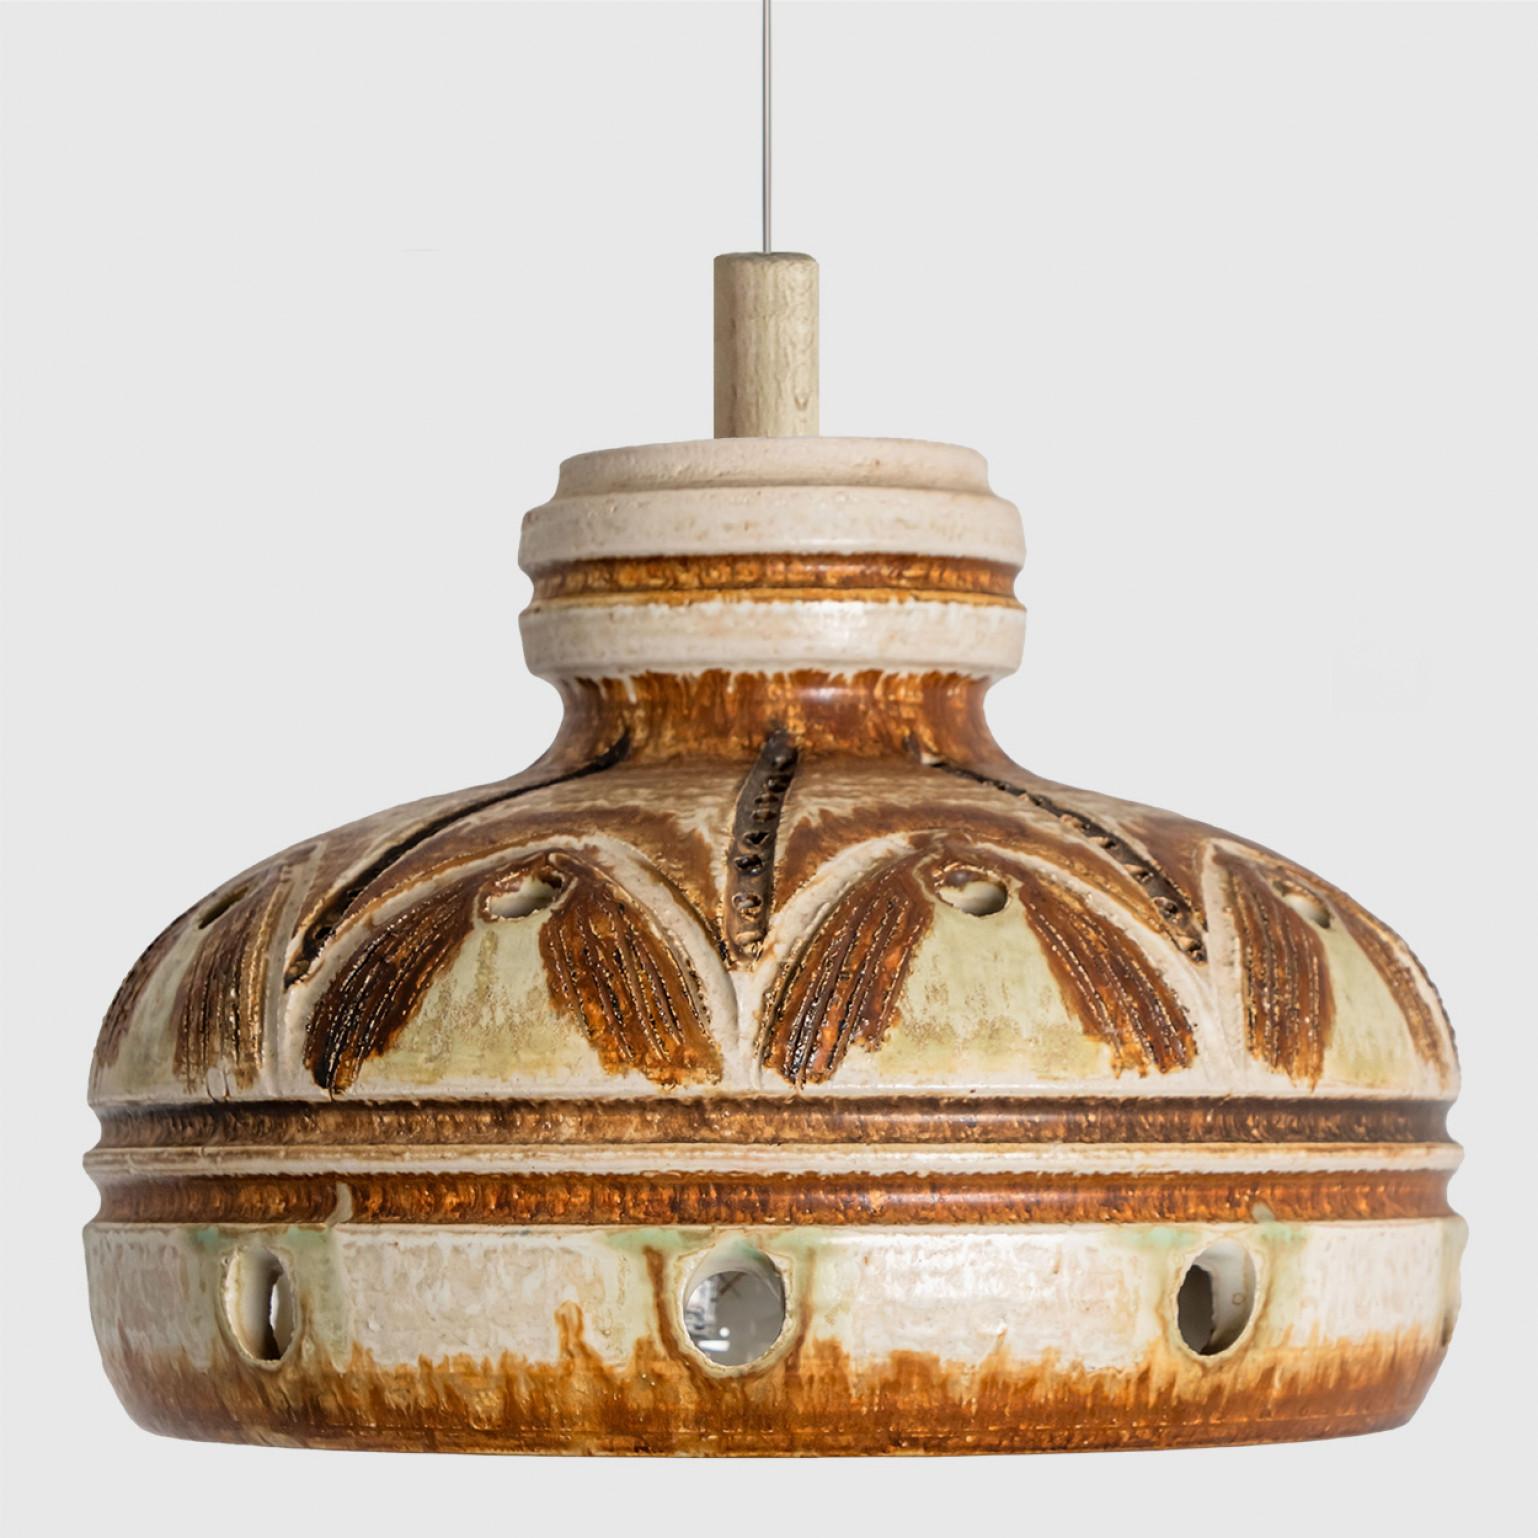 Stunning round hanging lamp with an unusual shape, made with rich ivory and terra colored ceramics, manufactured in the 1970s in Denmark. We also have a multitude of unique colored ceramic light sets and arrangements, all available on the